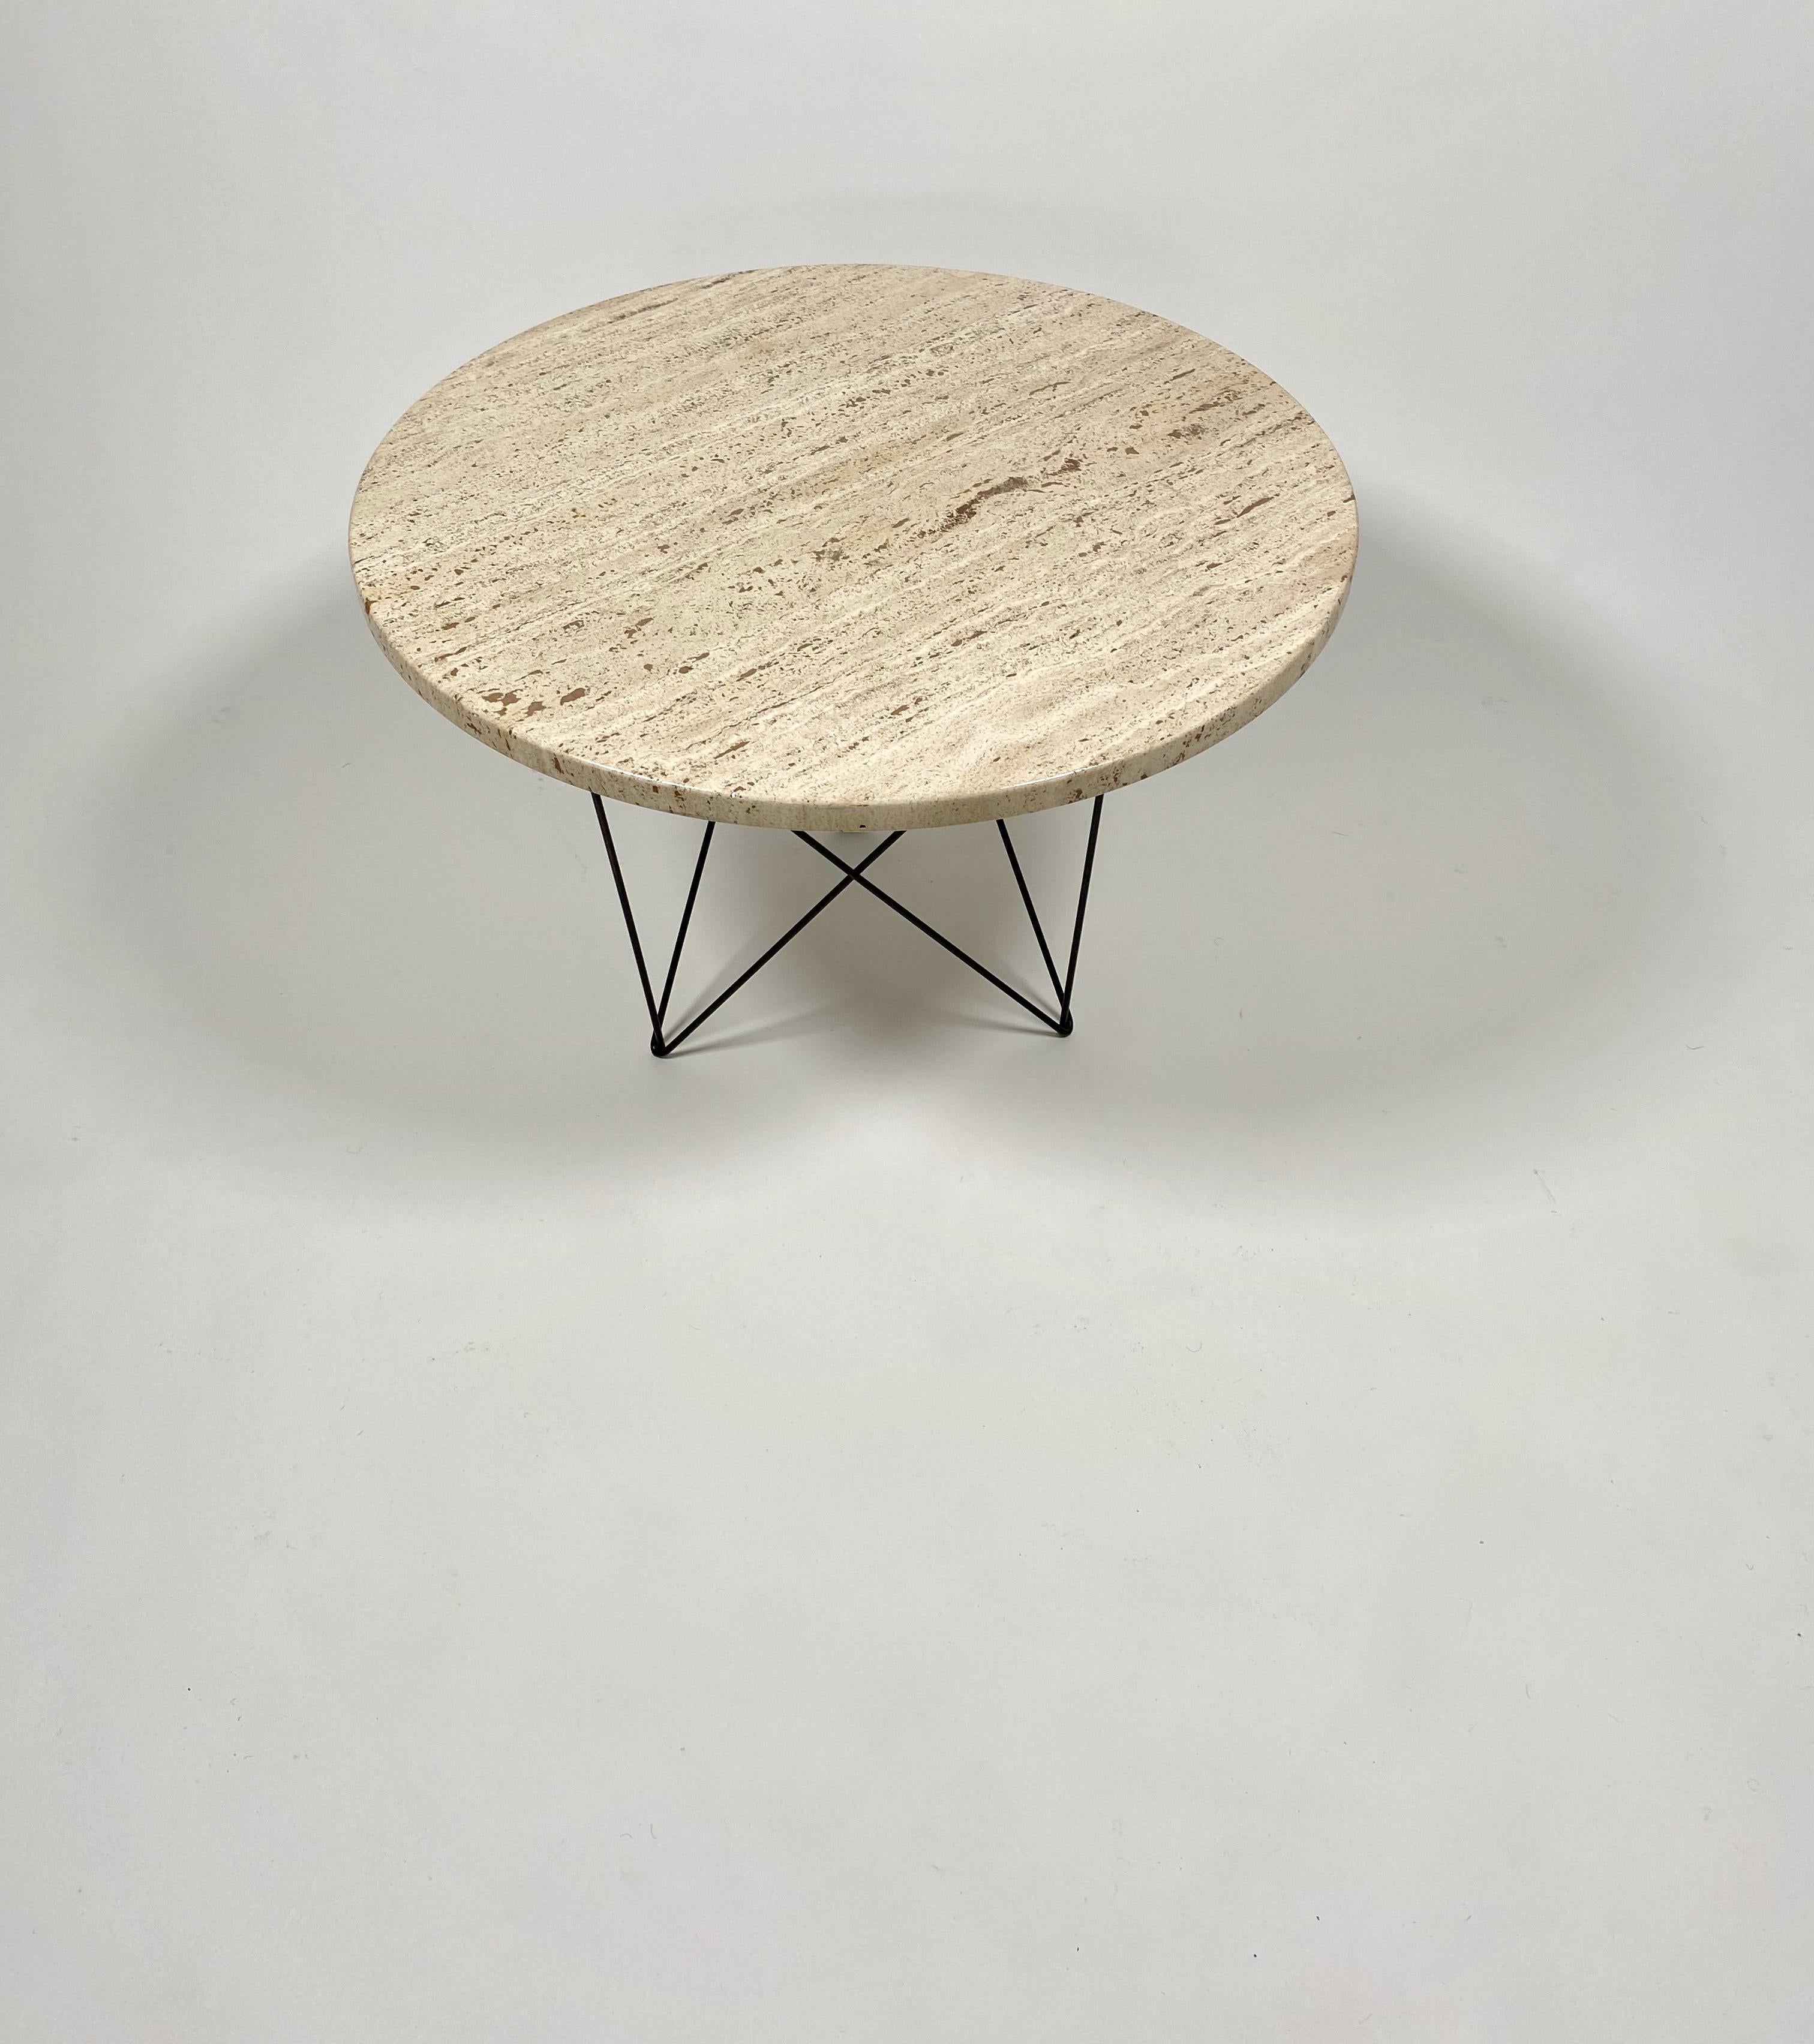 American 1960s Travertine Side Table w/ Wire Base by Martin Perfit for Rene Brancusi